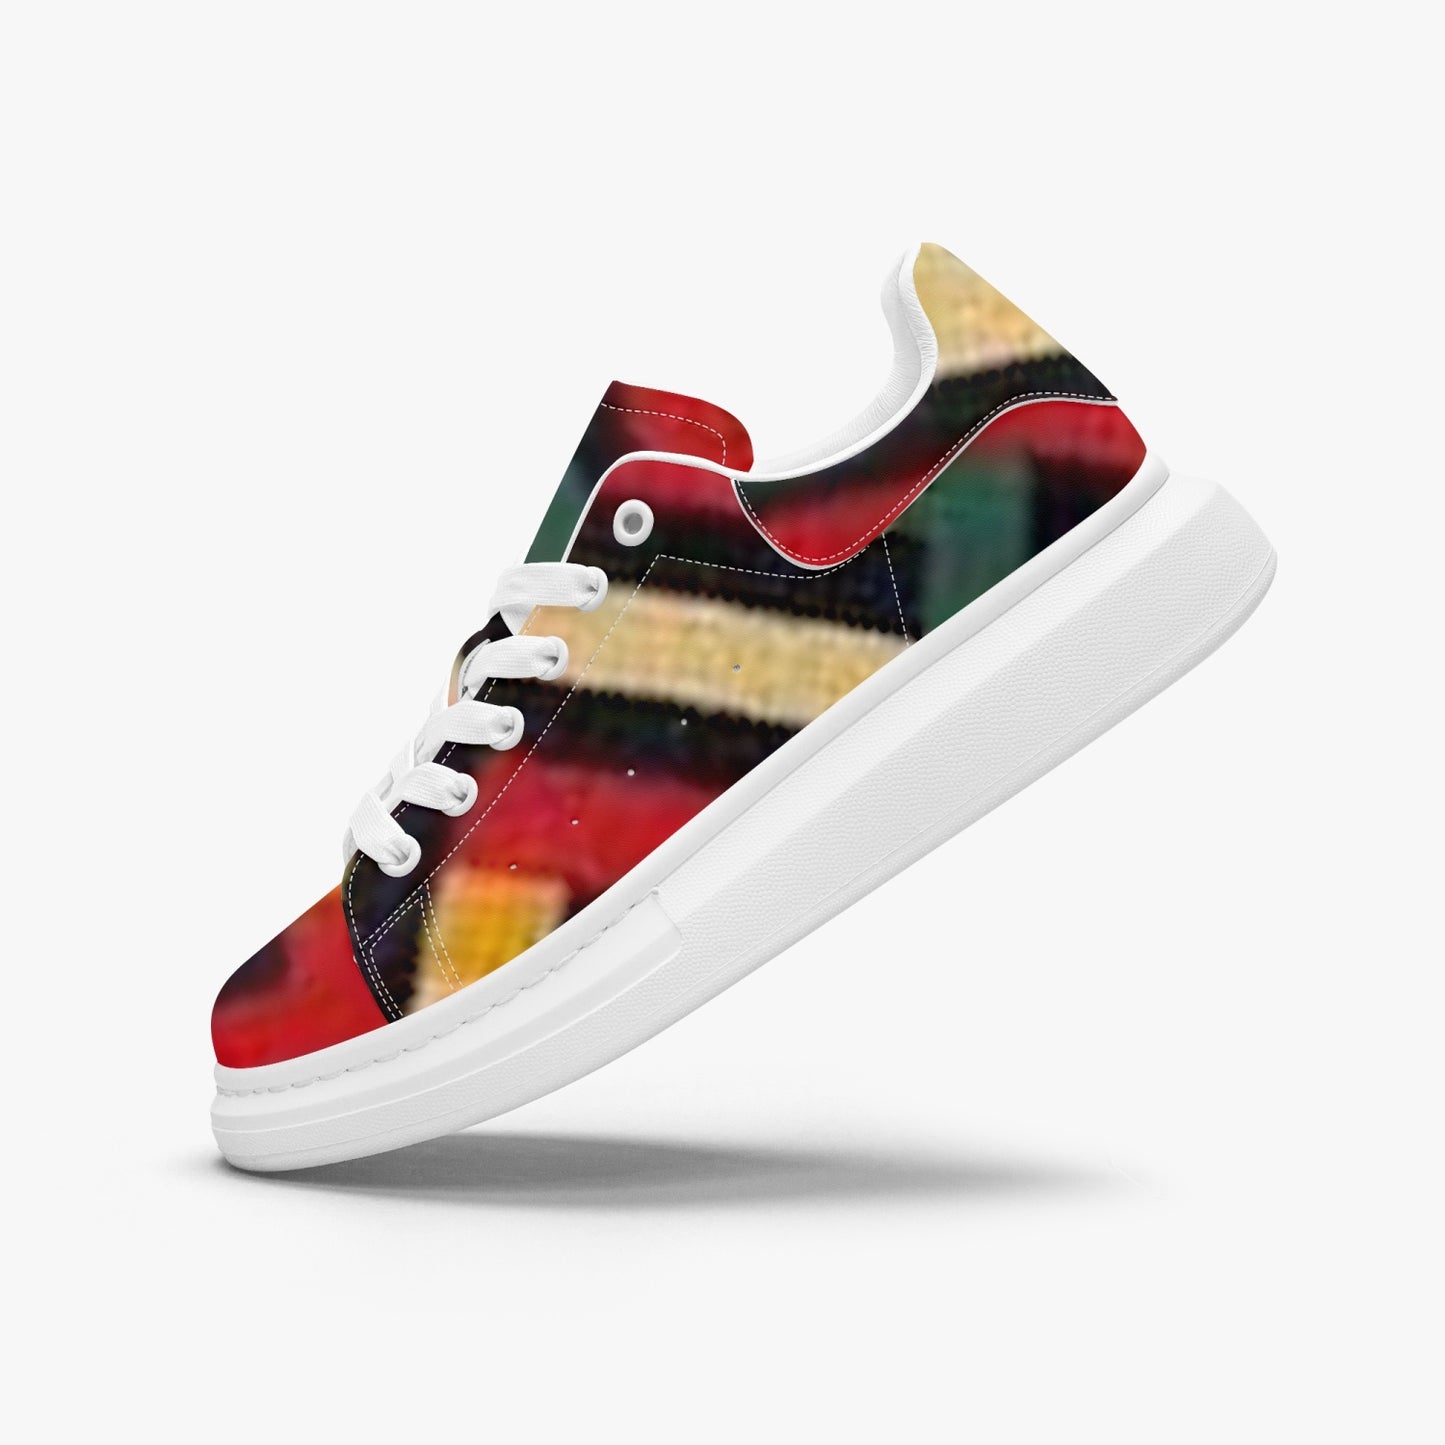 FZ Unisex African Print Leather Oversized Sneakers